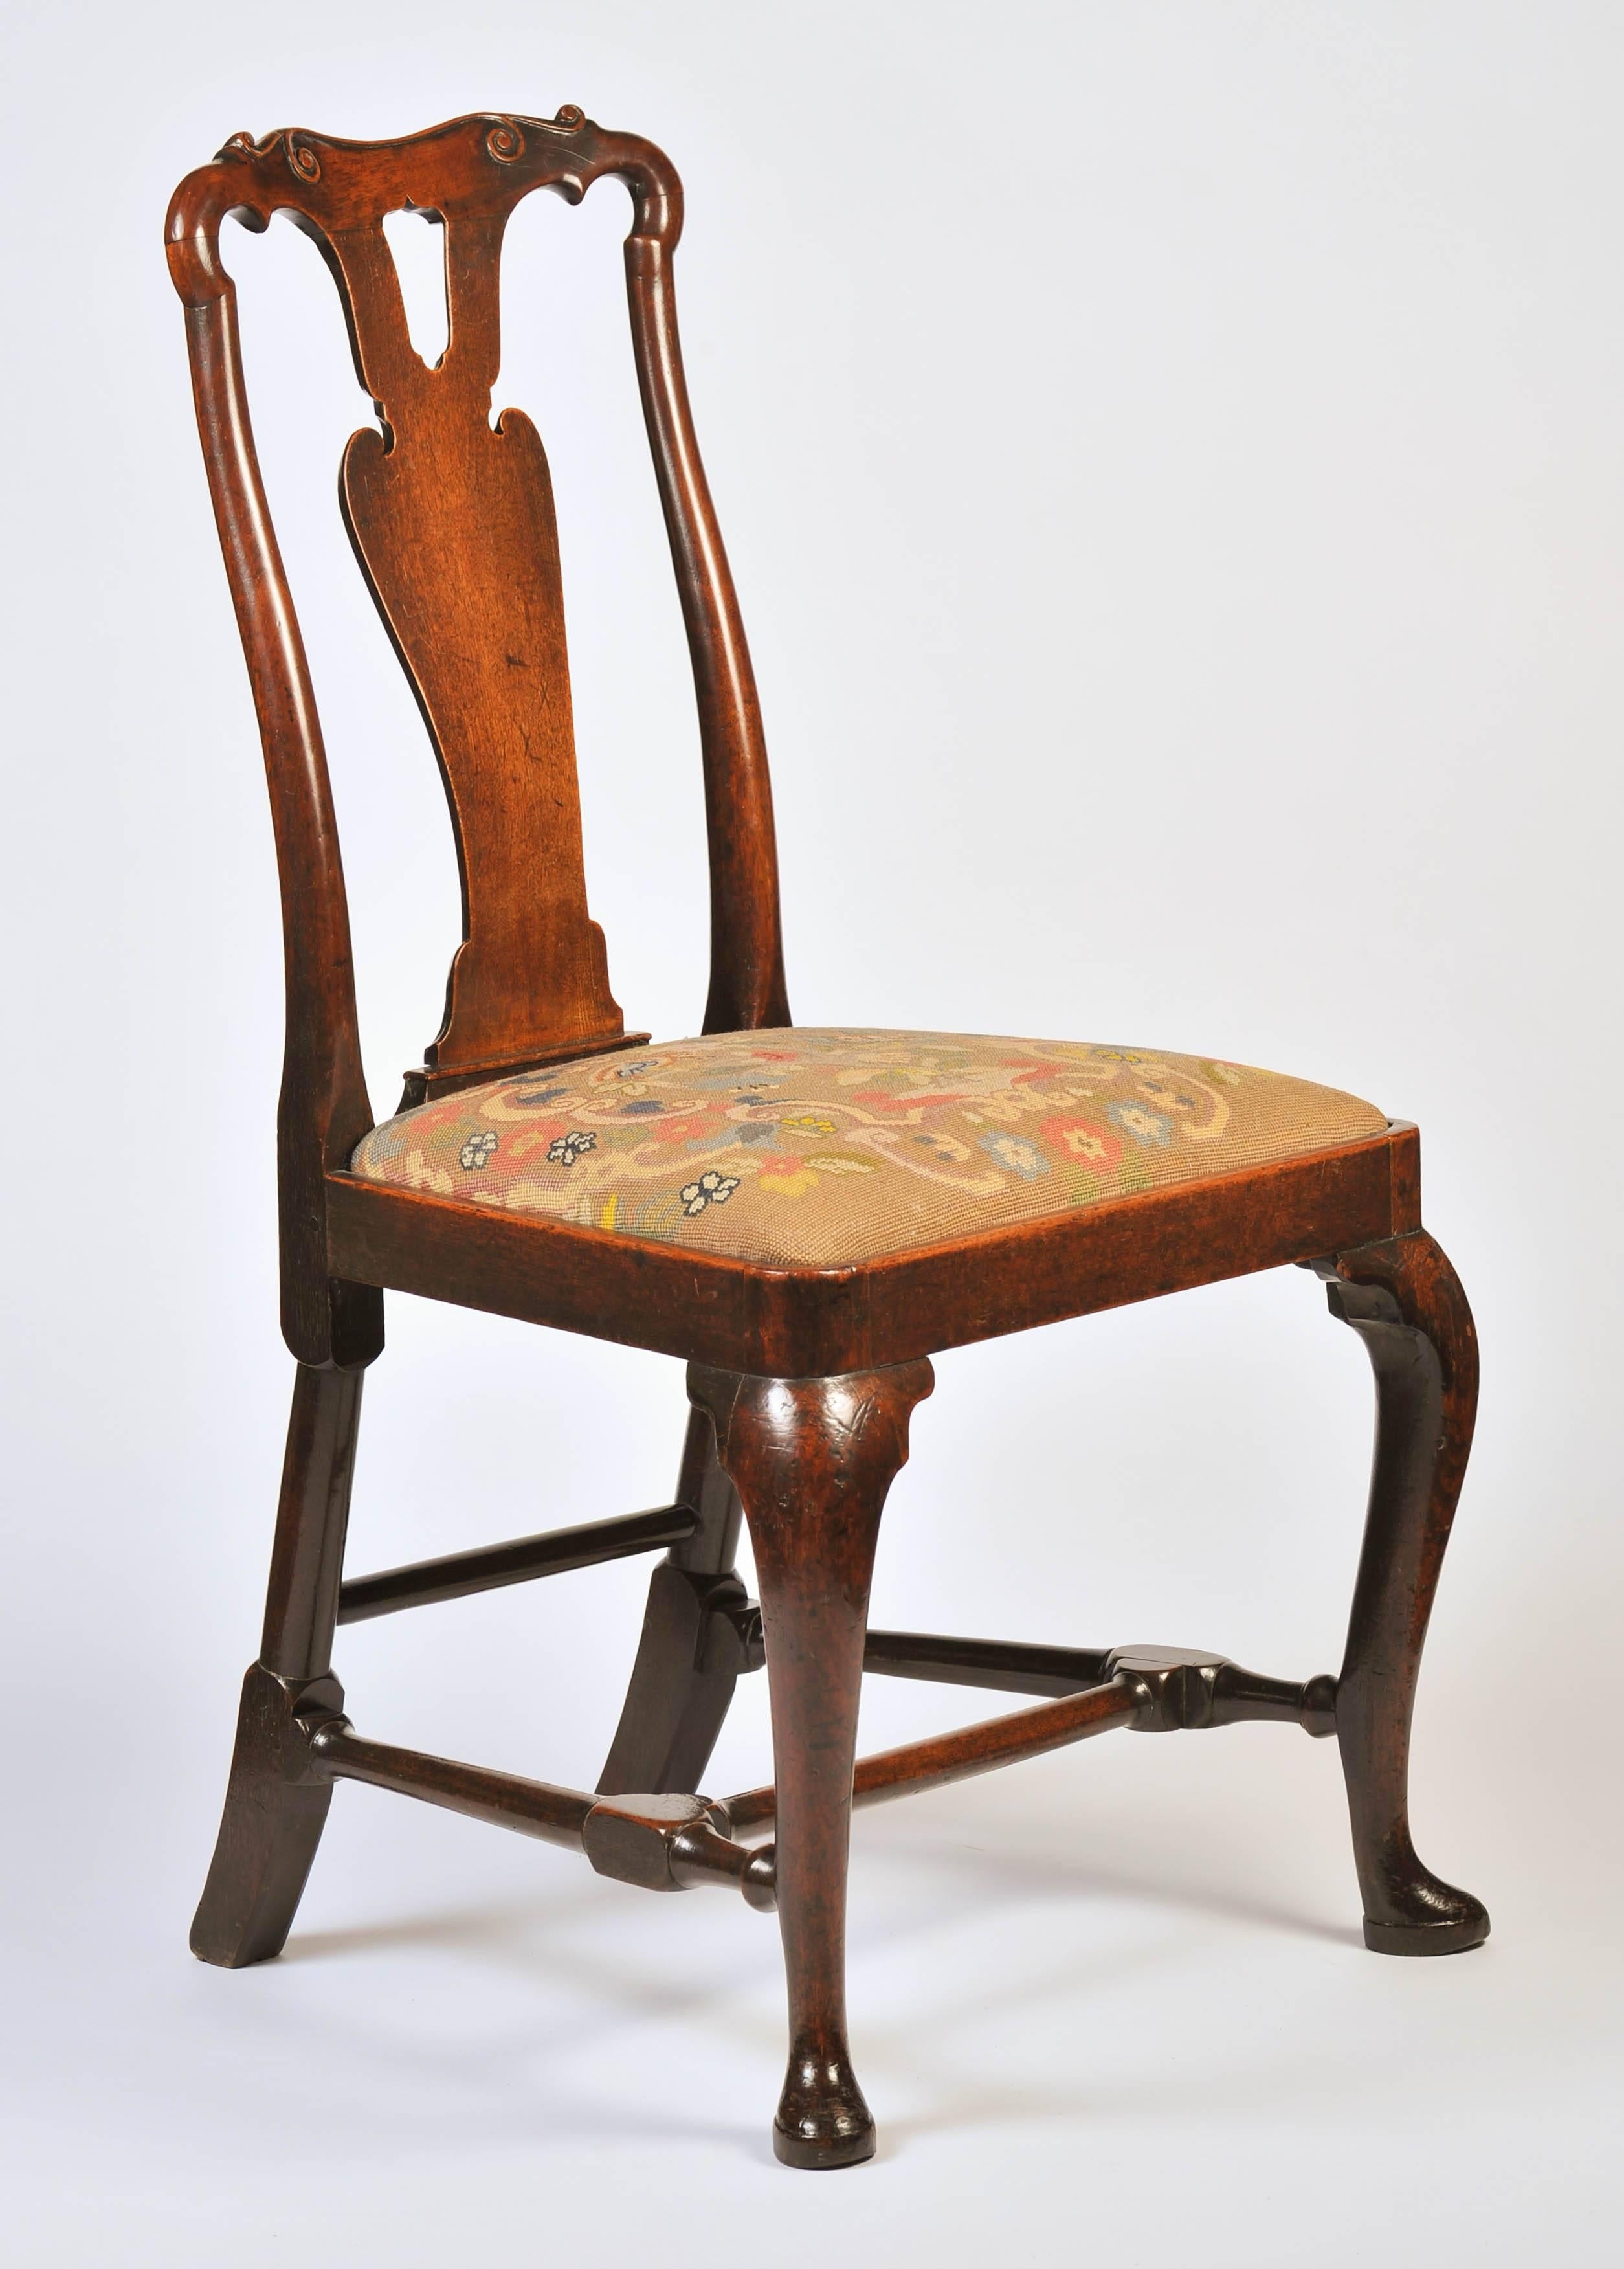 Chinoiserie Pair of Early 18th Century Walnut Chairs